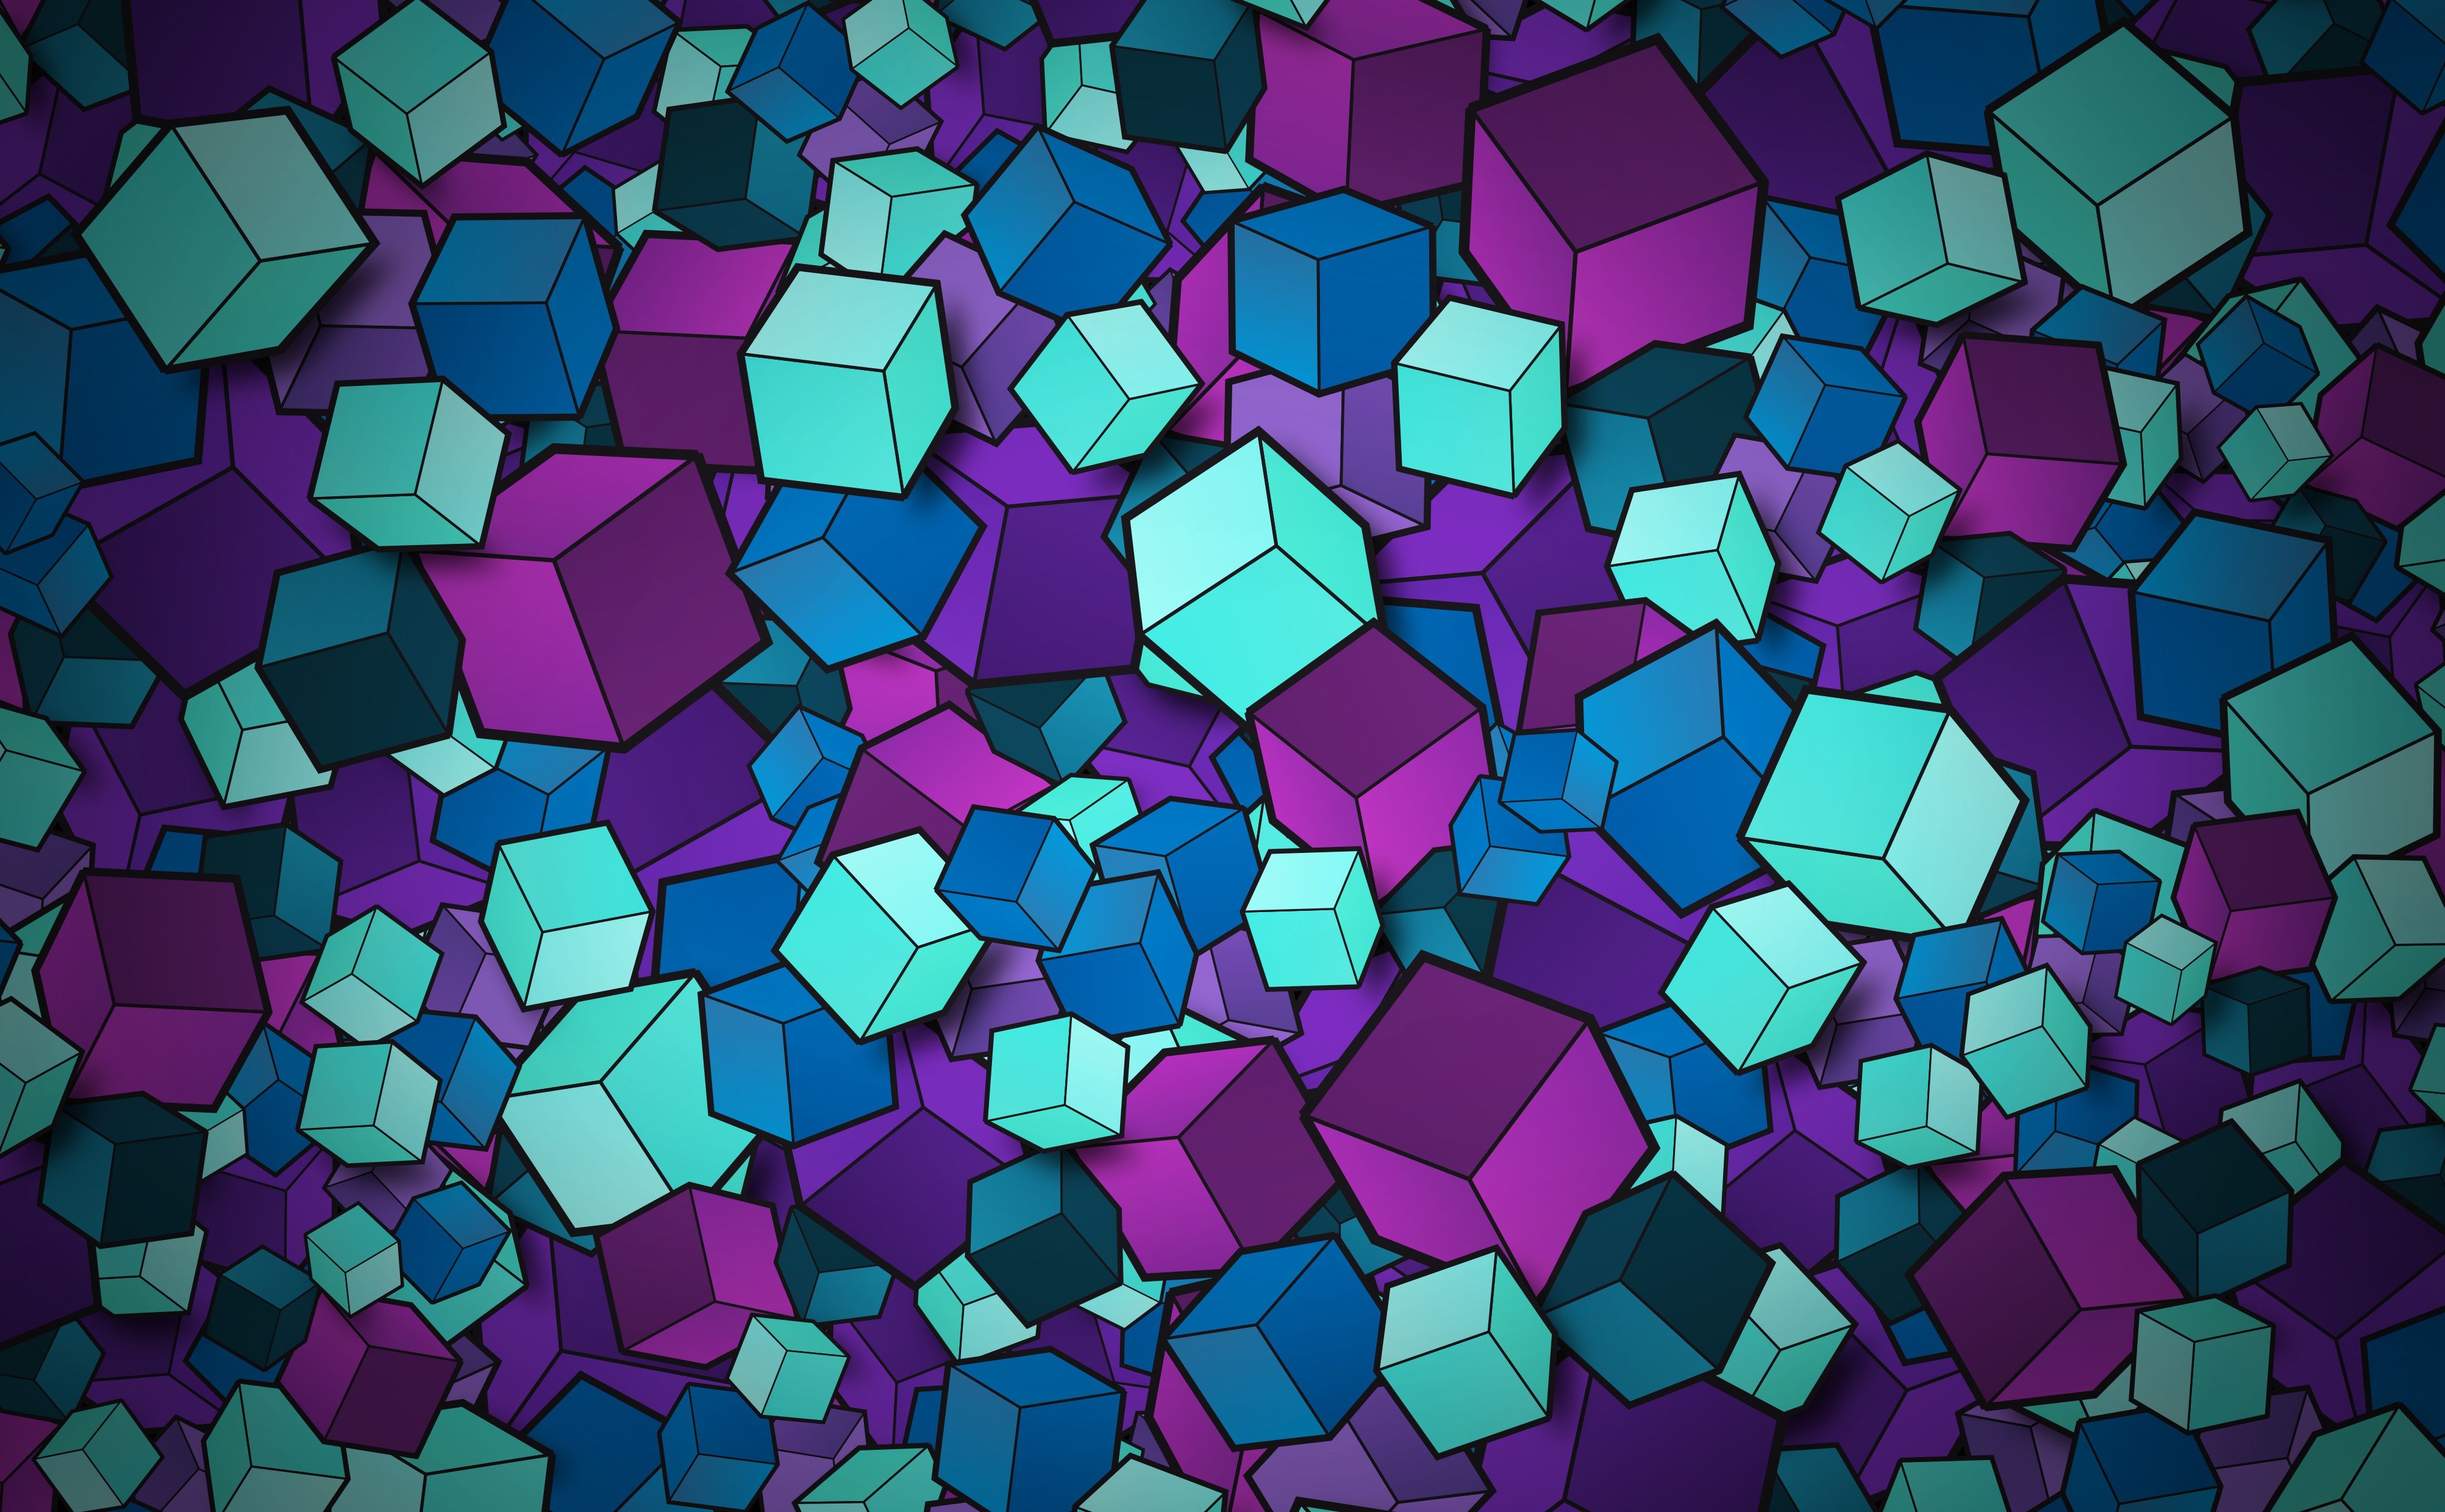 3D cubes 4K Wallpaper, Colorful, Geometric, Patterns, Abstract